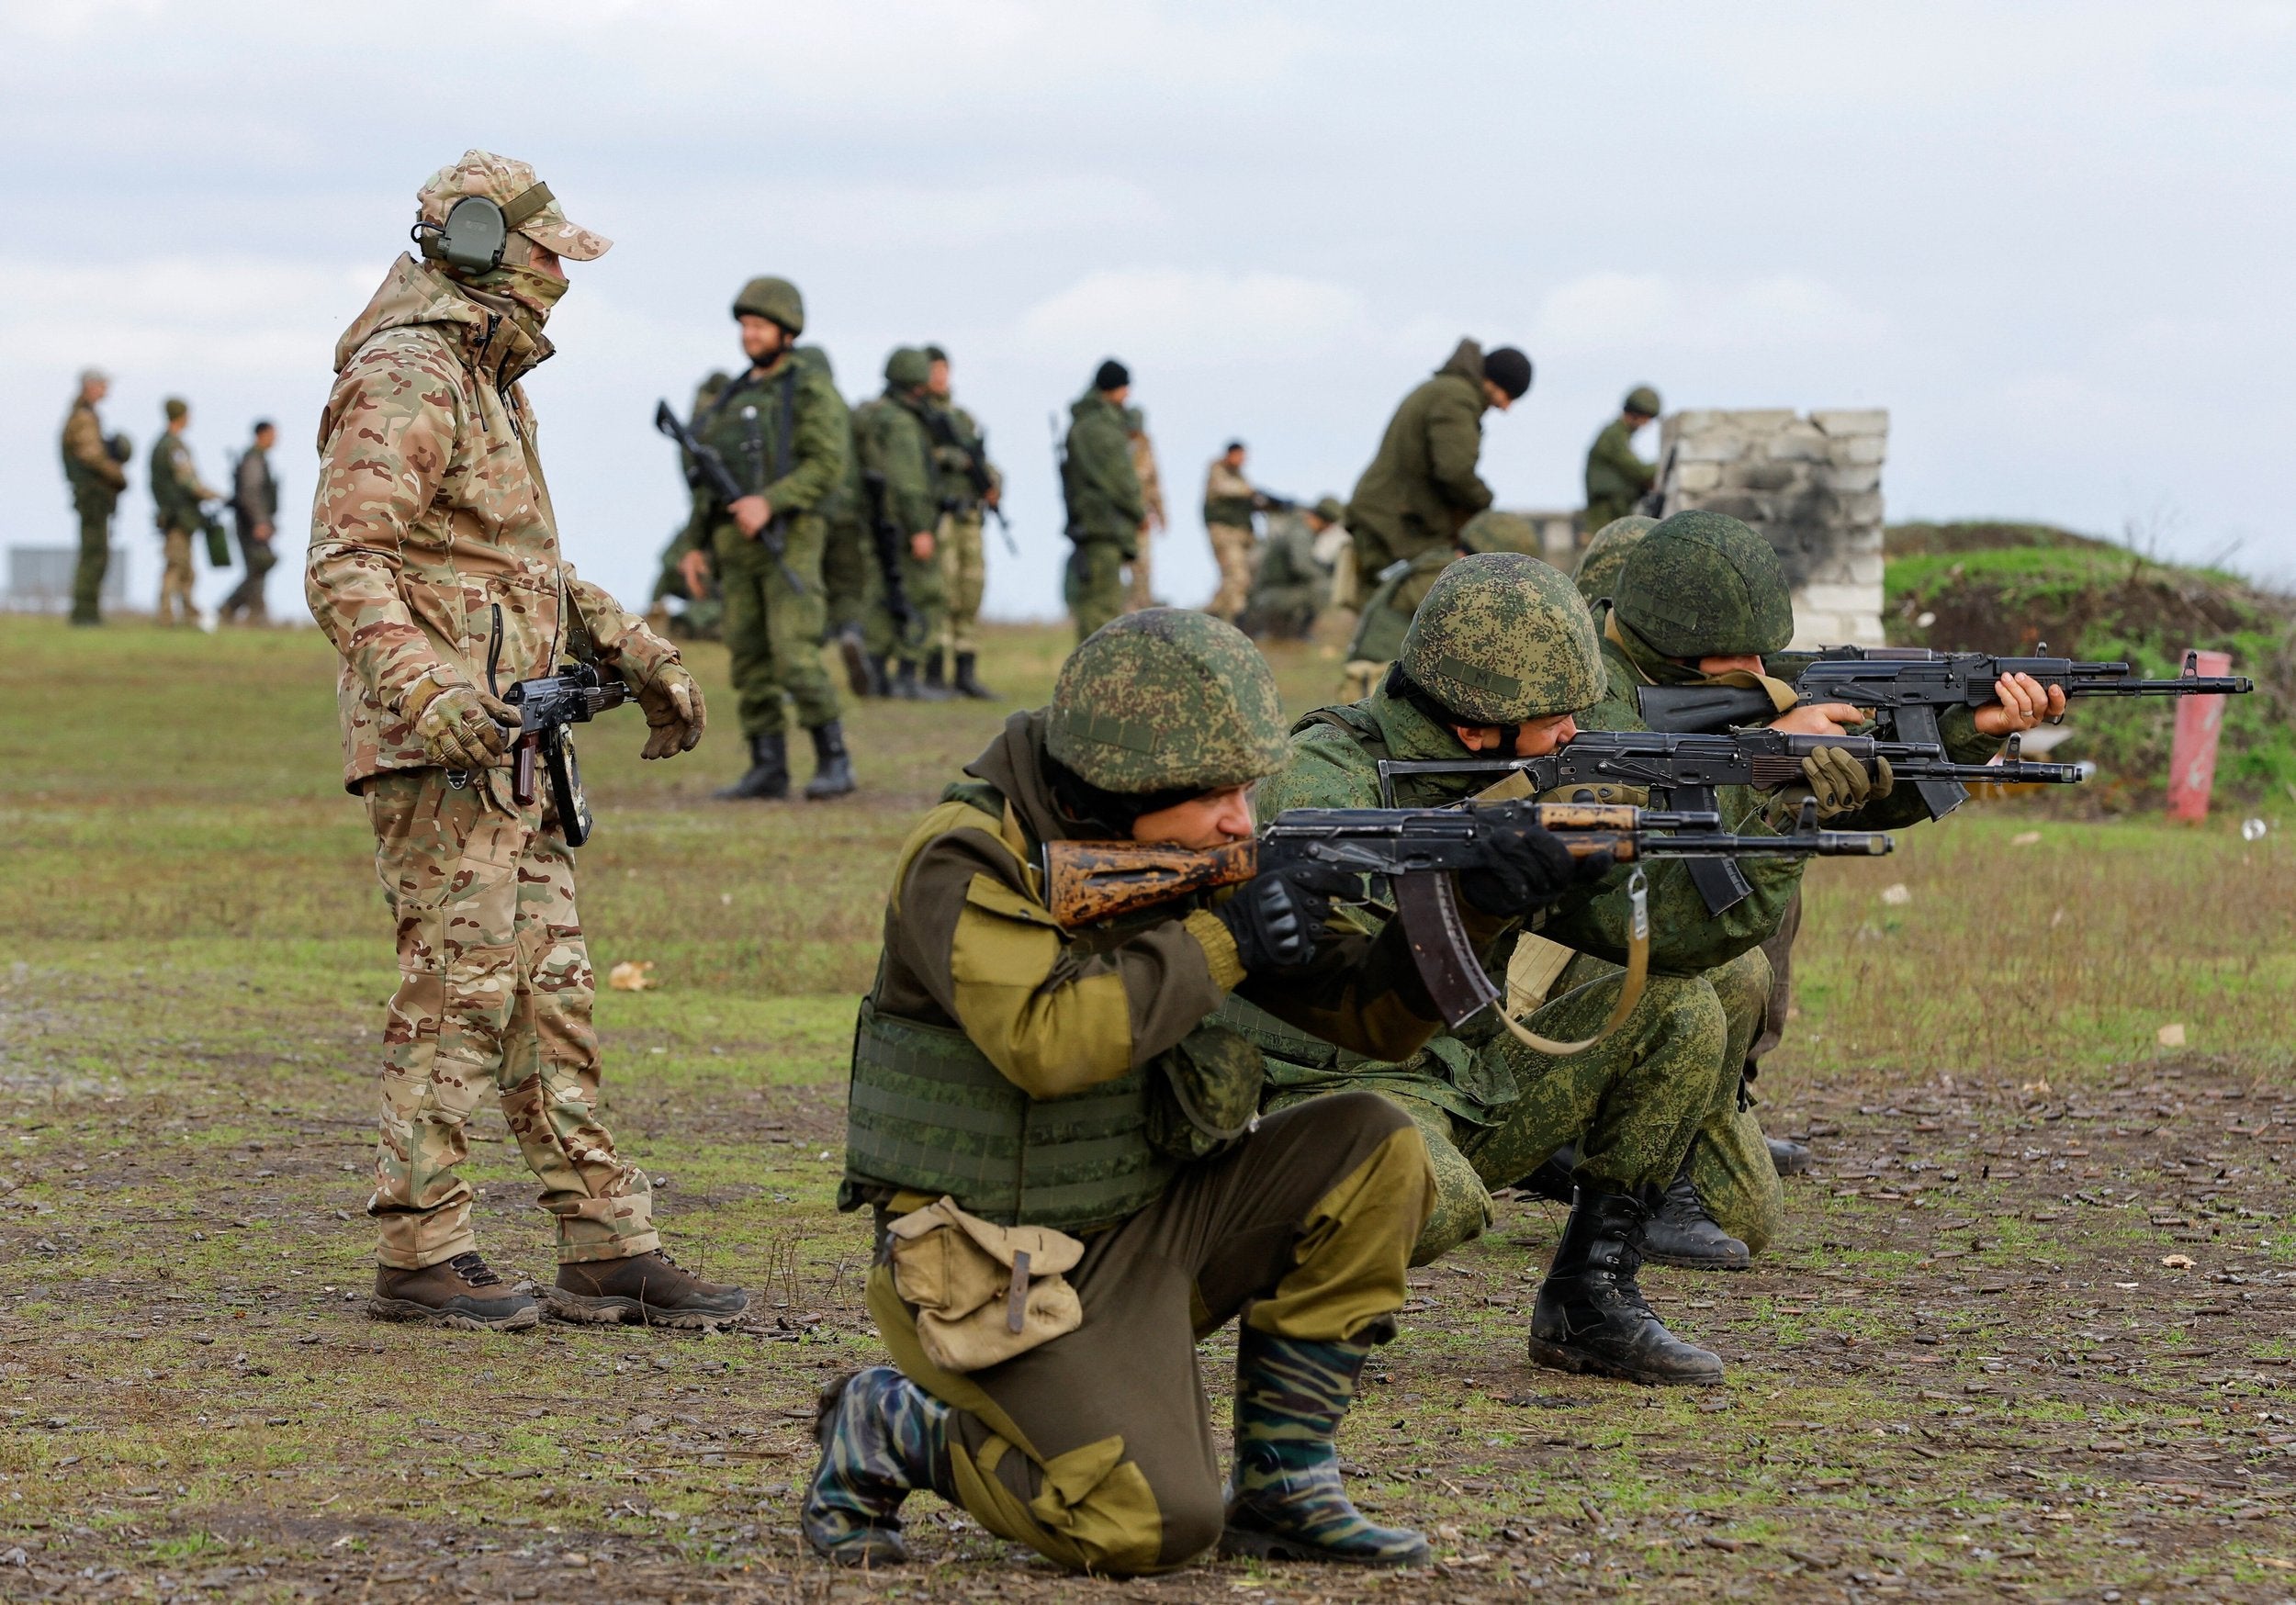 Ukraine says Russia plans new mobilization to “turn tide of war”